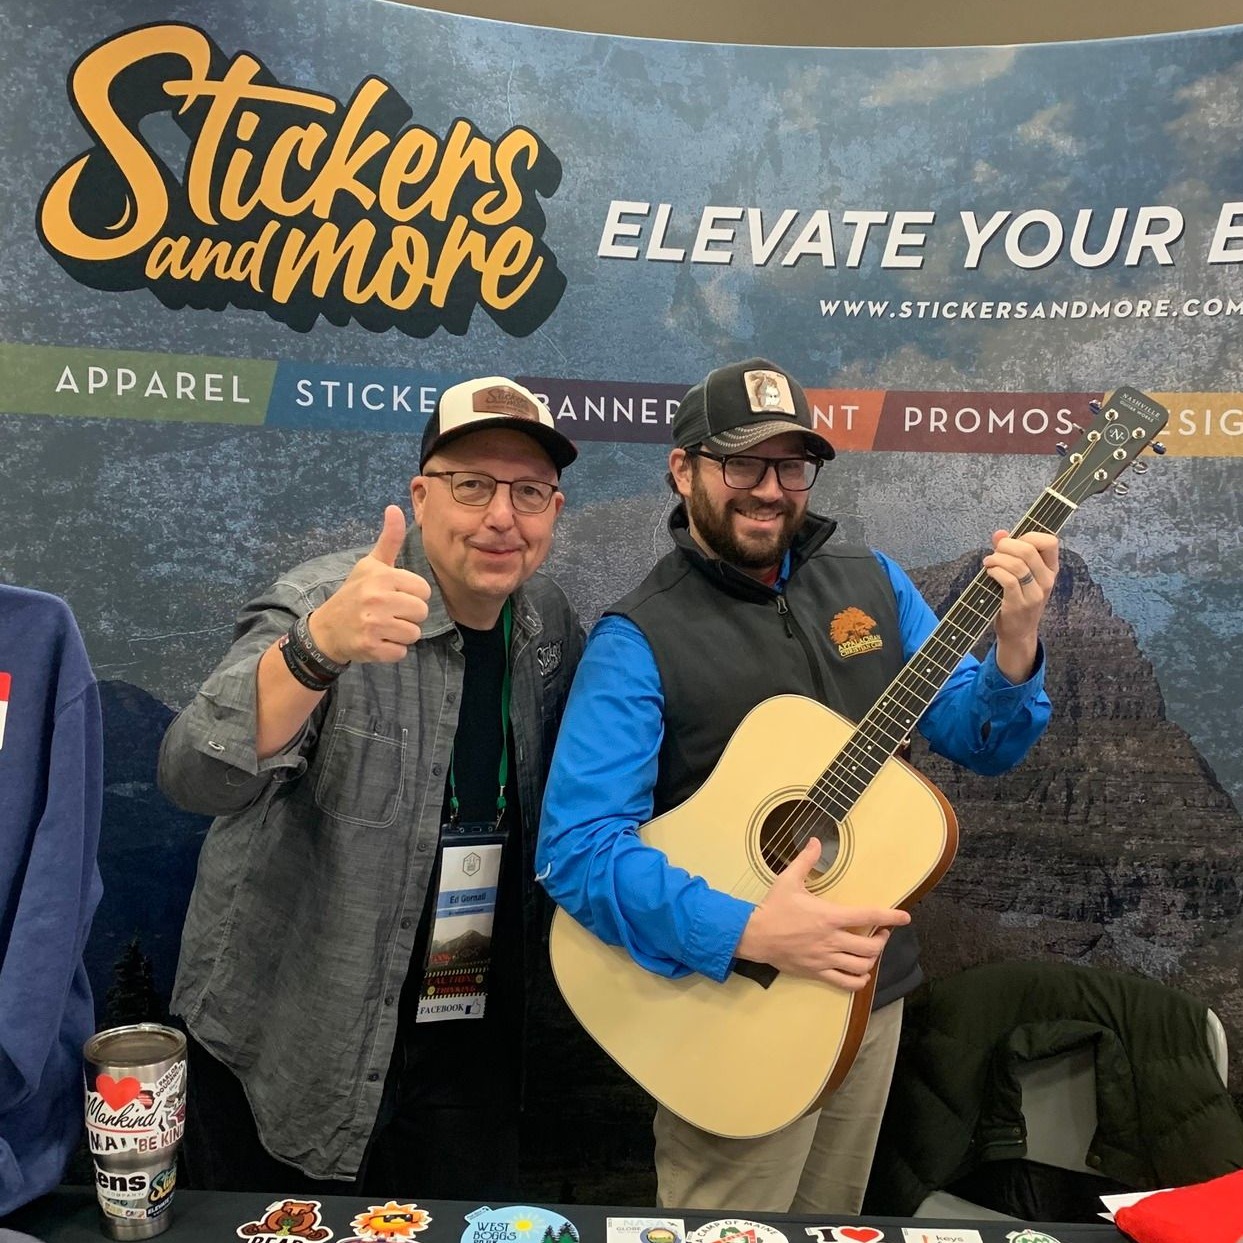 Congrats to Juan from Camp ACC-Appalachian Christian Camp on winning the guitar giveaway at the 2023 CCL Conference in Louisville, KY. We would love to help you elevate your brand this year. Check out our website and see all the ways we can help.
https://stickersandmore.com/camp/
@campacc #camps #churchlife #churchcamp #camplife #ccl2023 #winnerswin #guitar #giveaways